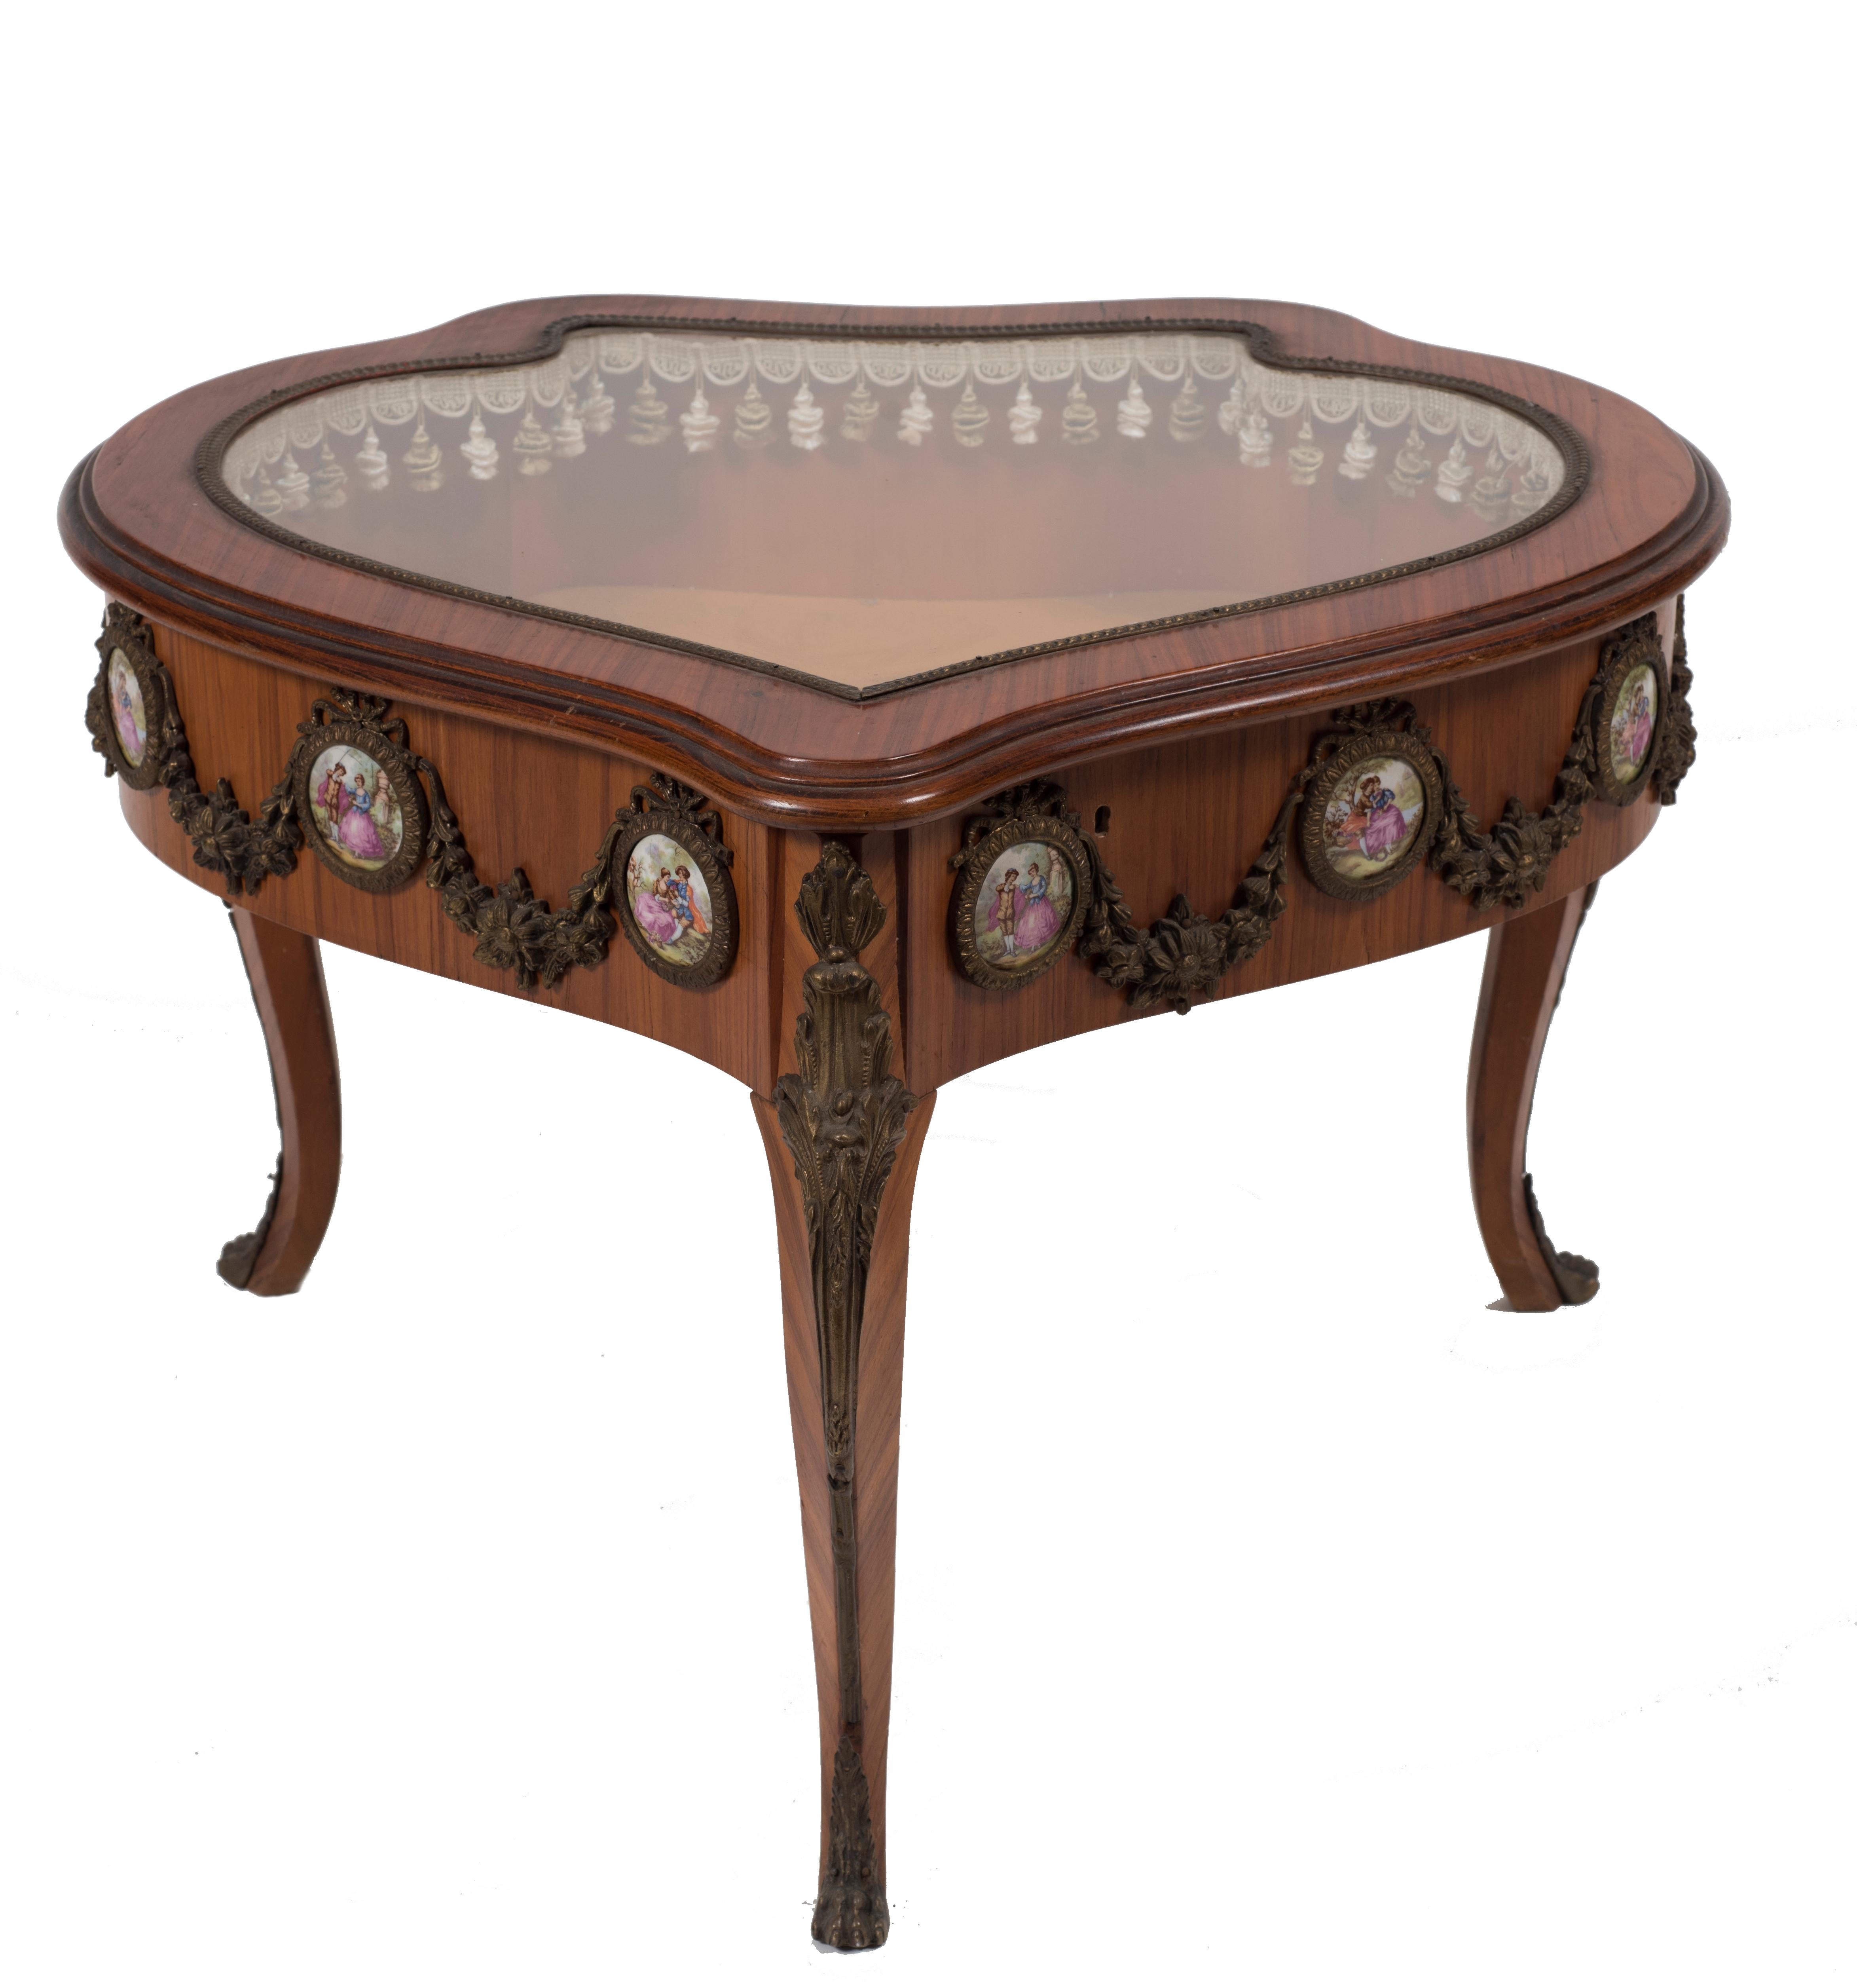 A wonderful vintage table, a piece of original furniture realized at the beginning of the 19th century by French manufacture.

The little heart-shaped showcase-table is decorated with bronze and porcelain medallions painted with genre scenes